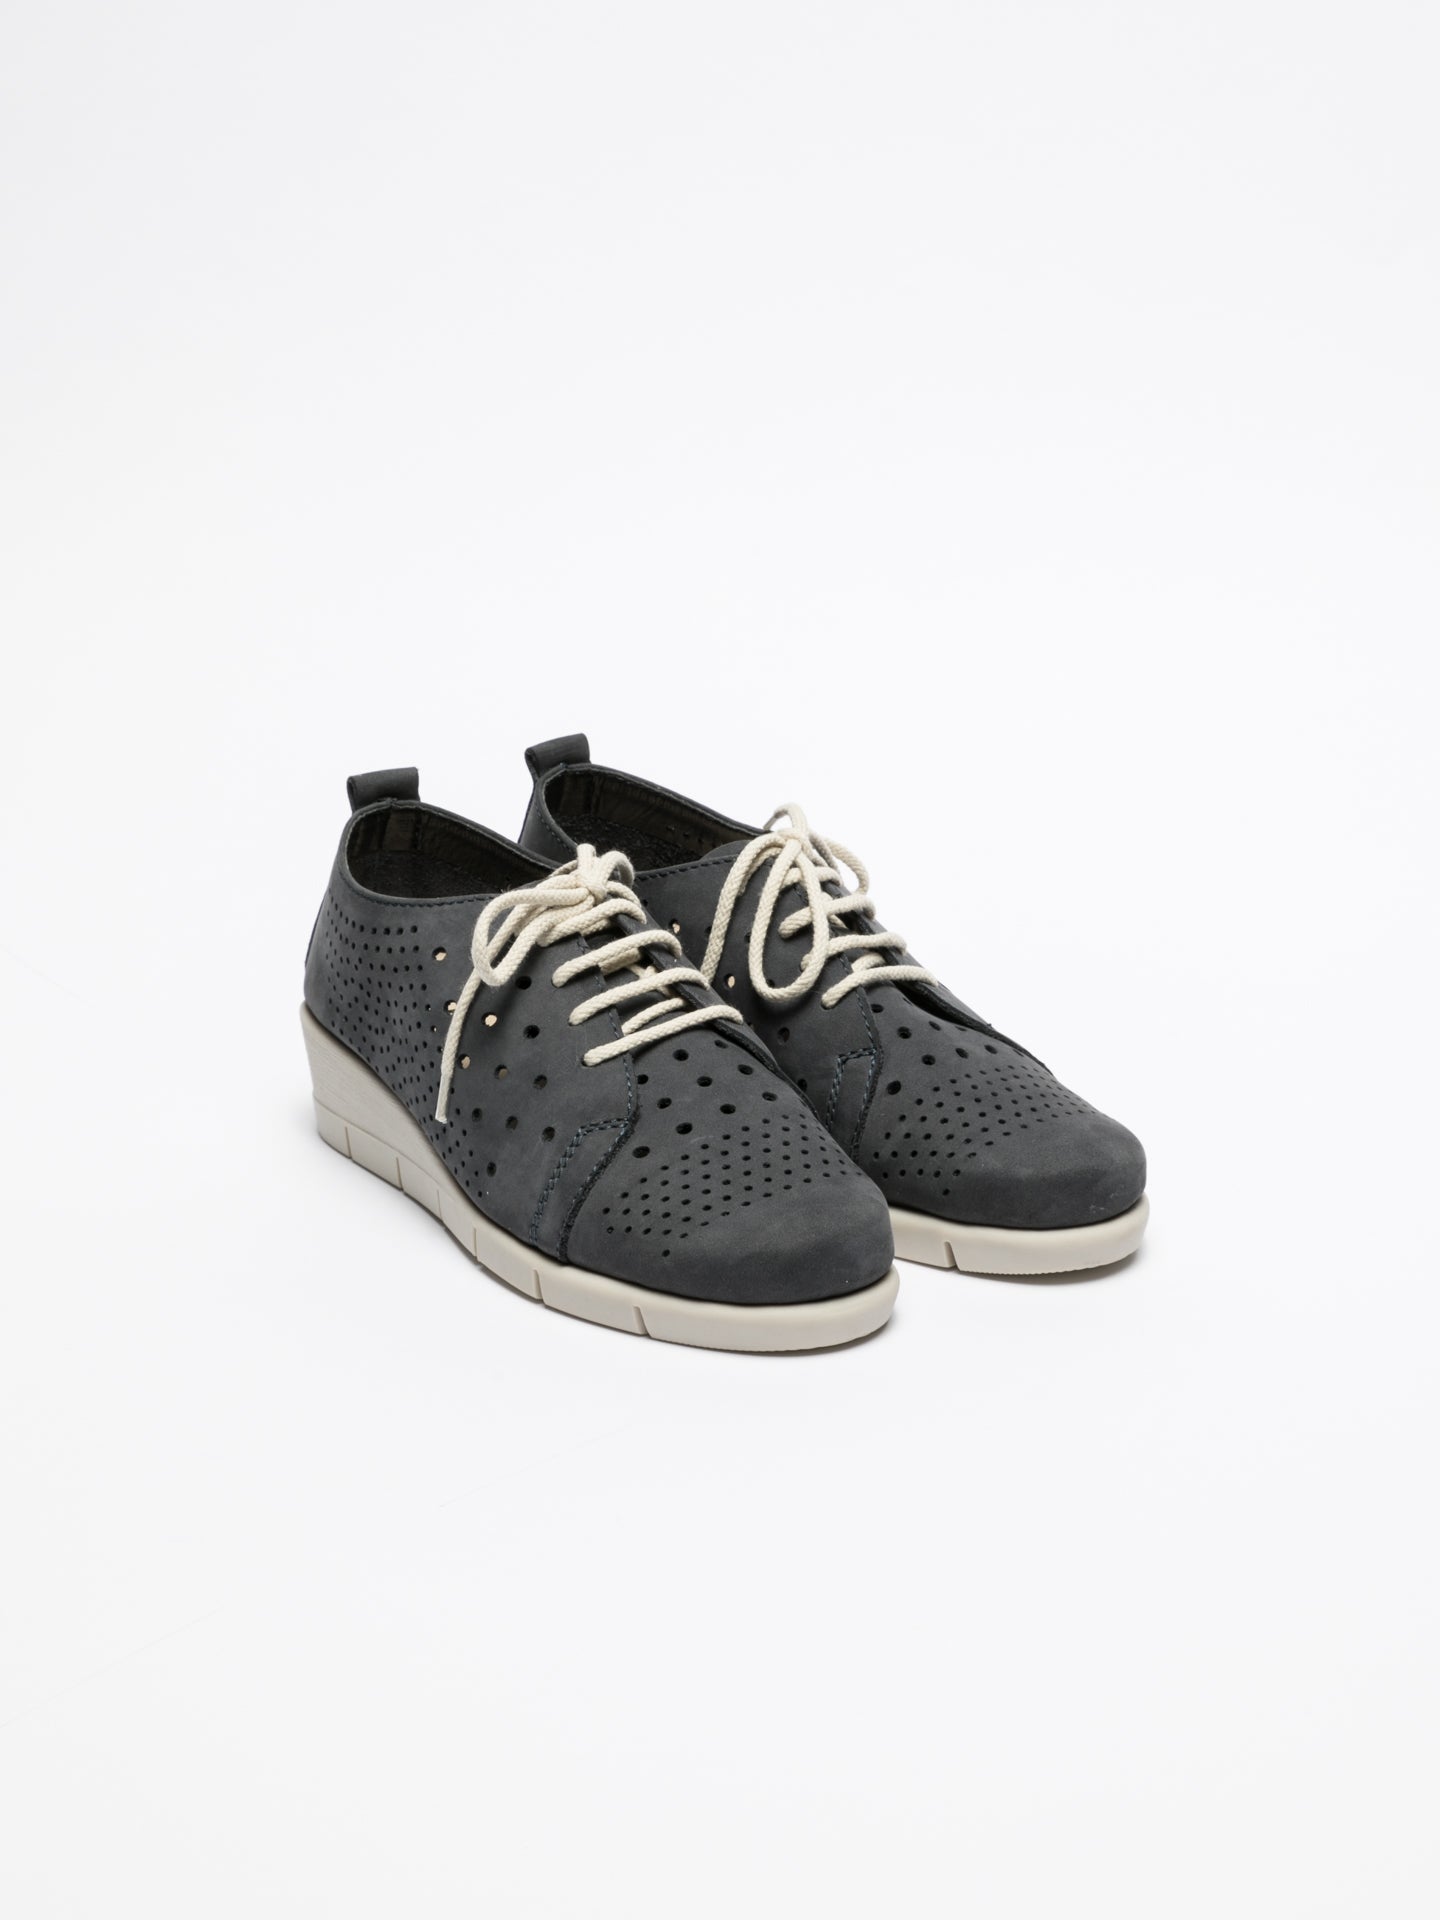 The Flexx Navy Lace Fastening Shoes